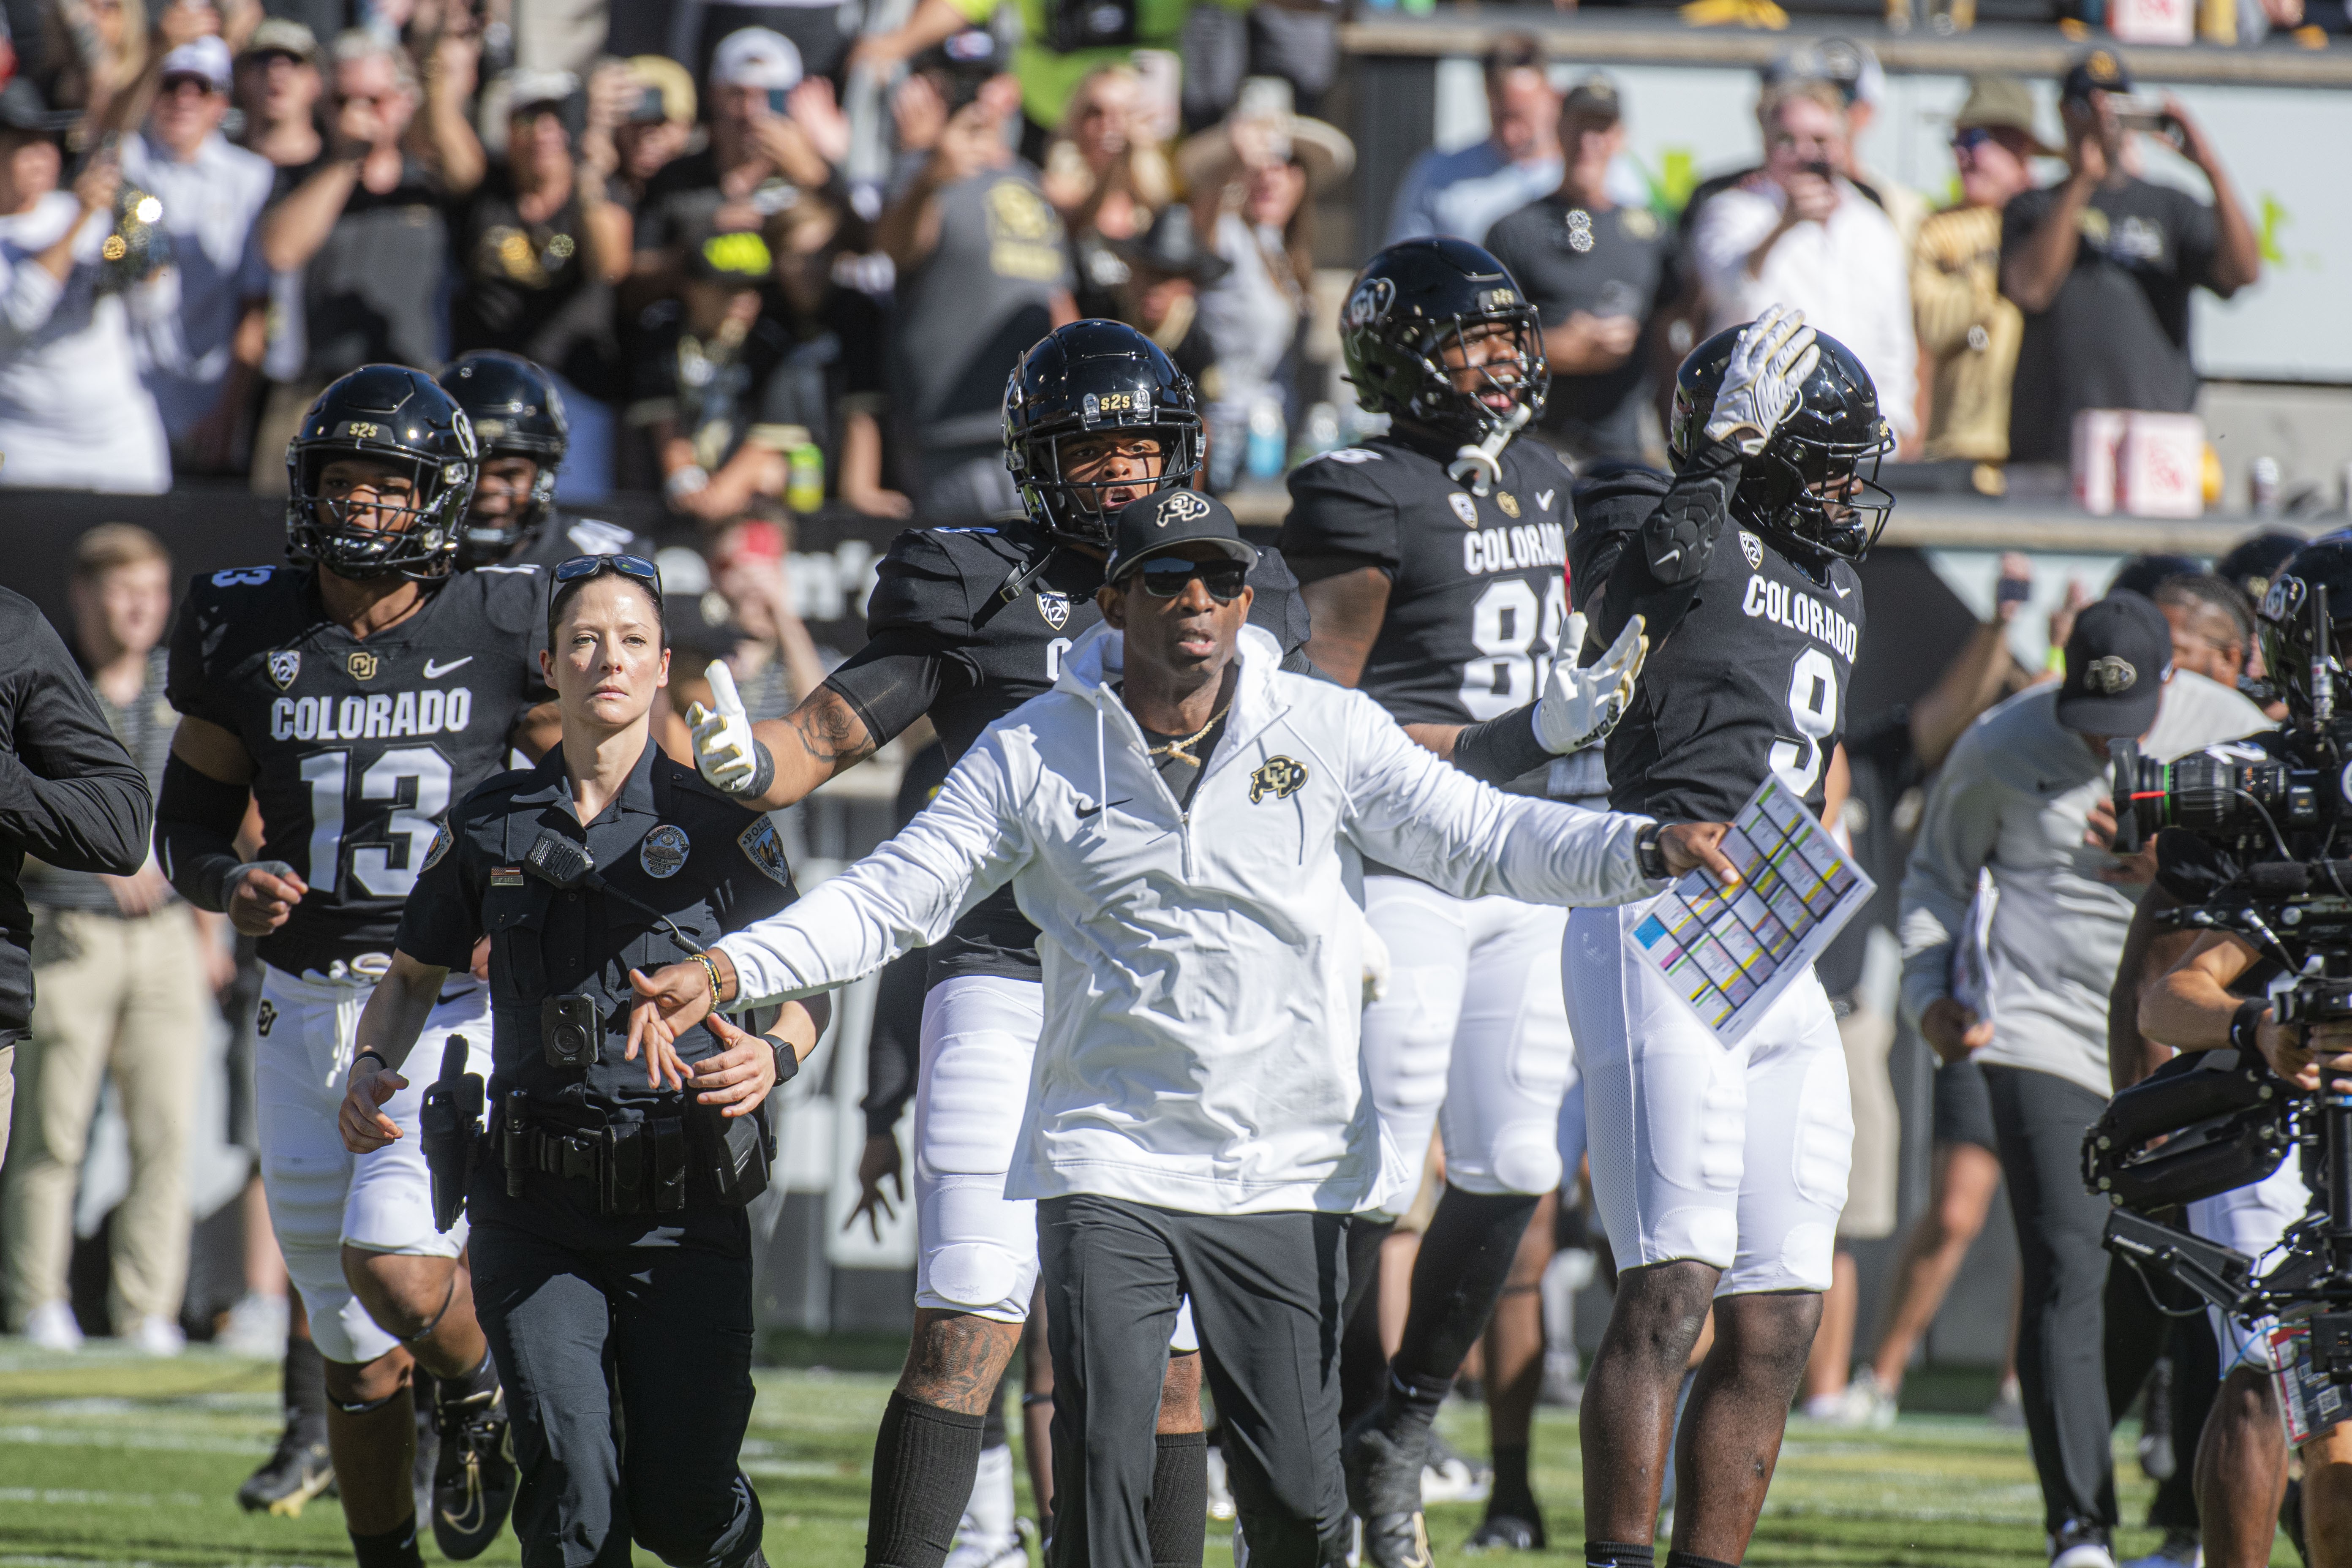 Wu-Tang Clan Attend CU Game To Show Support To Coach Prime